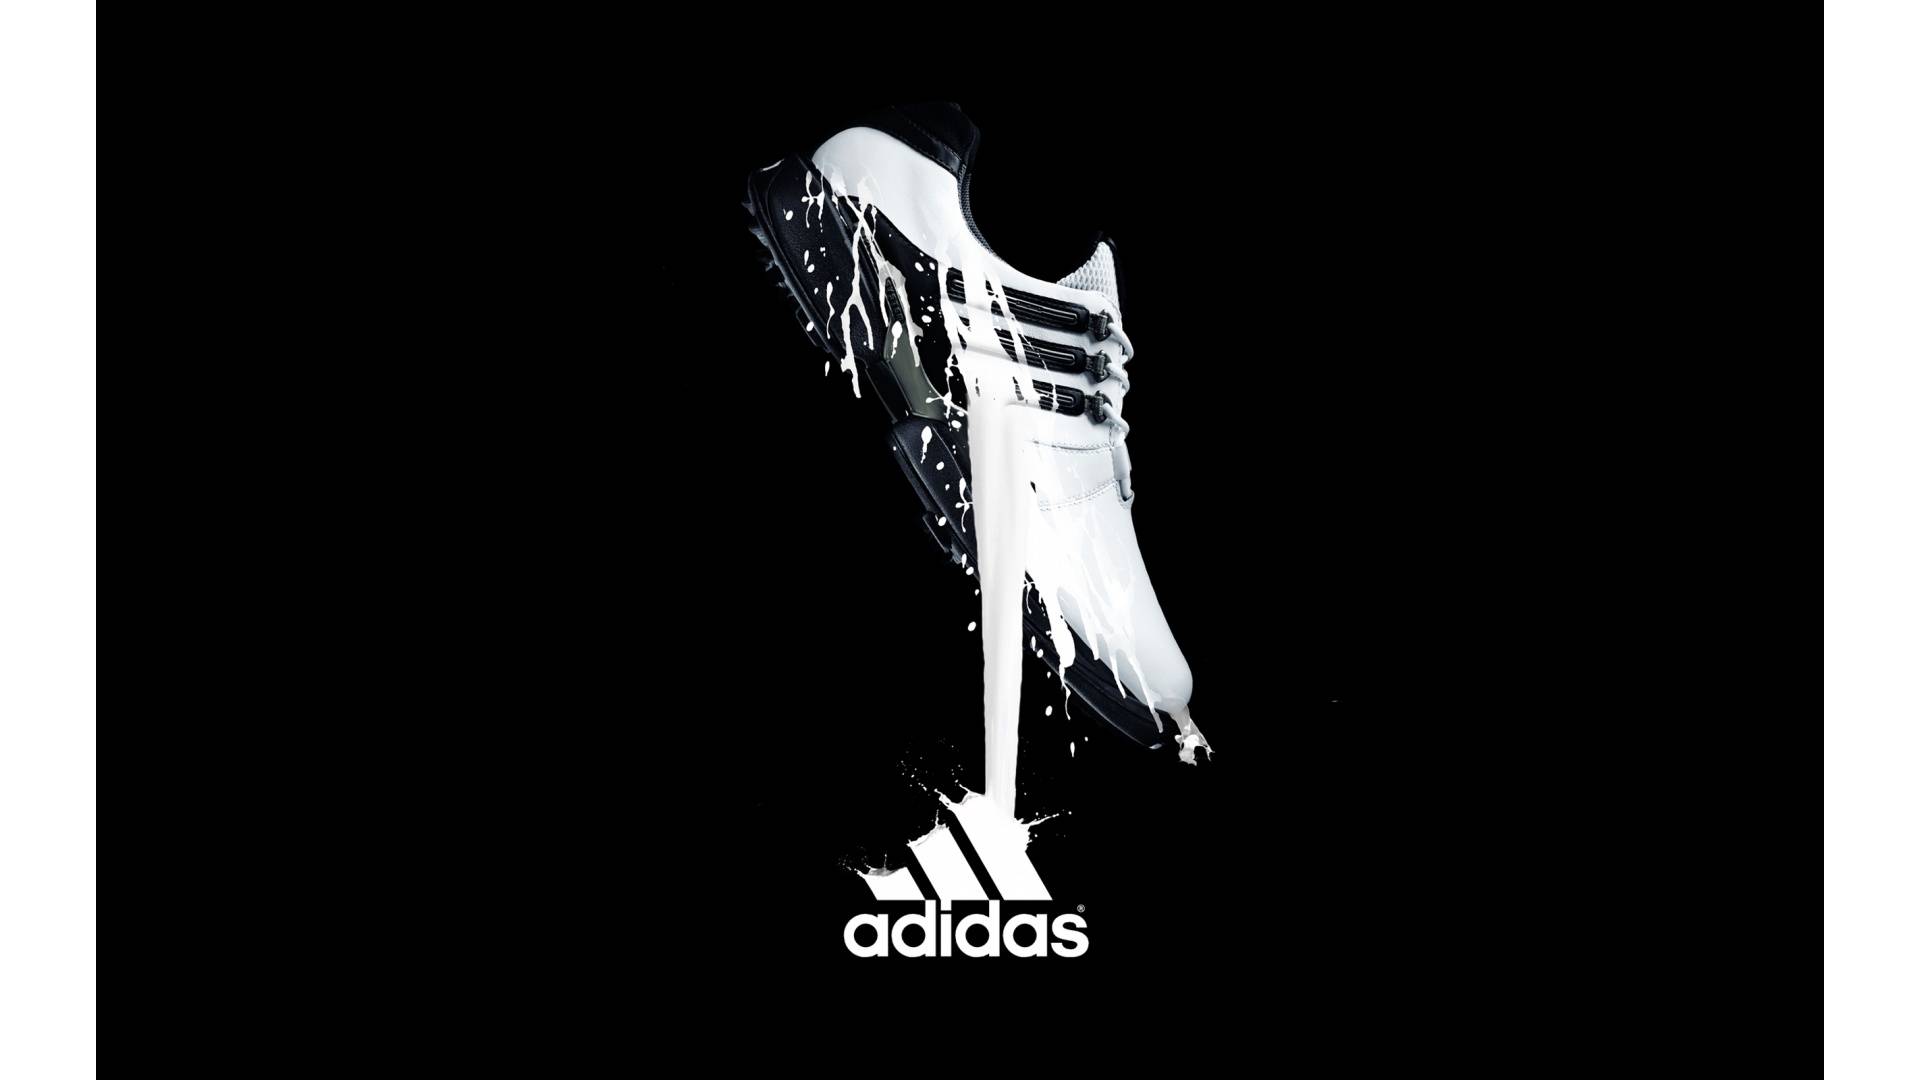 Stunning Adidas Pictures